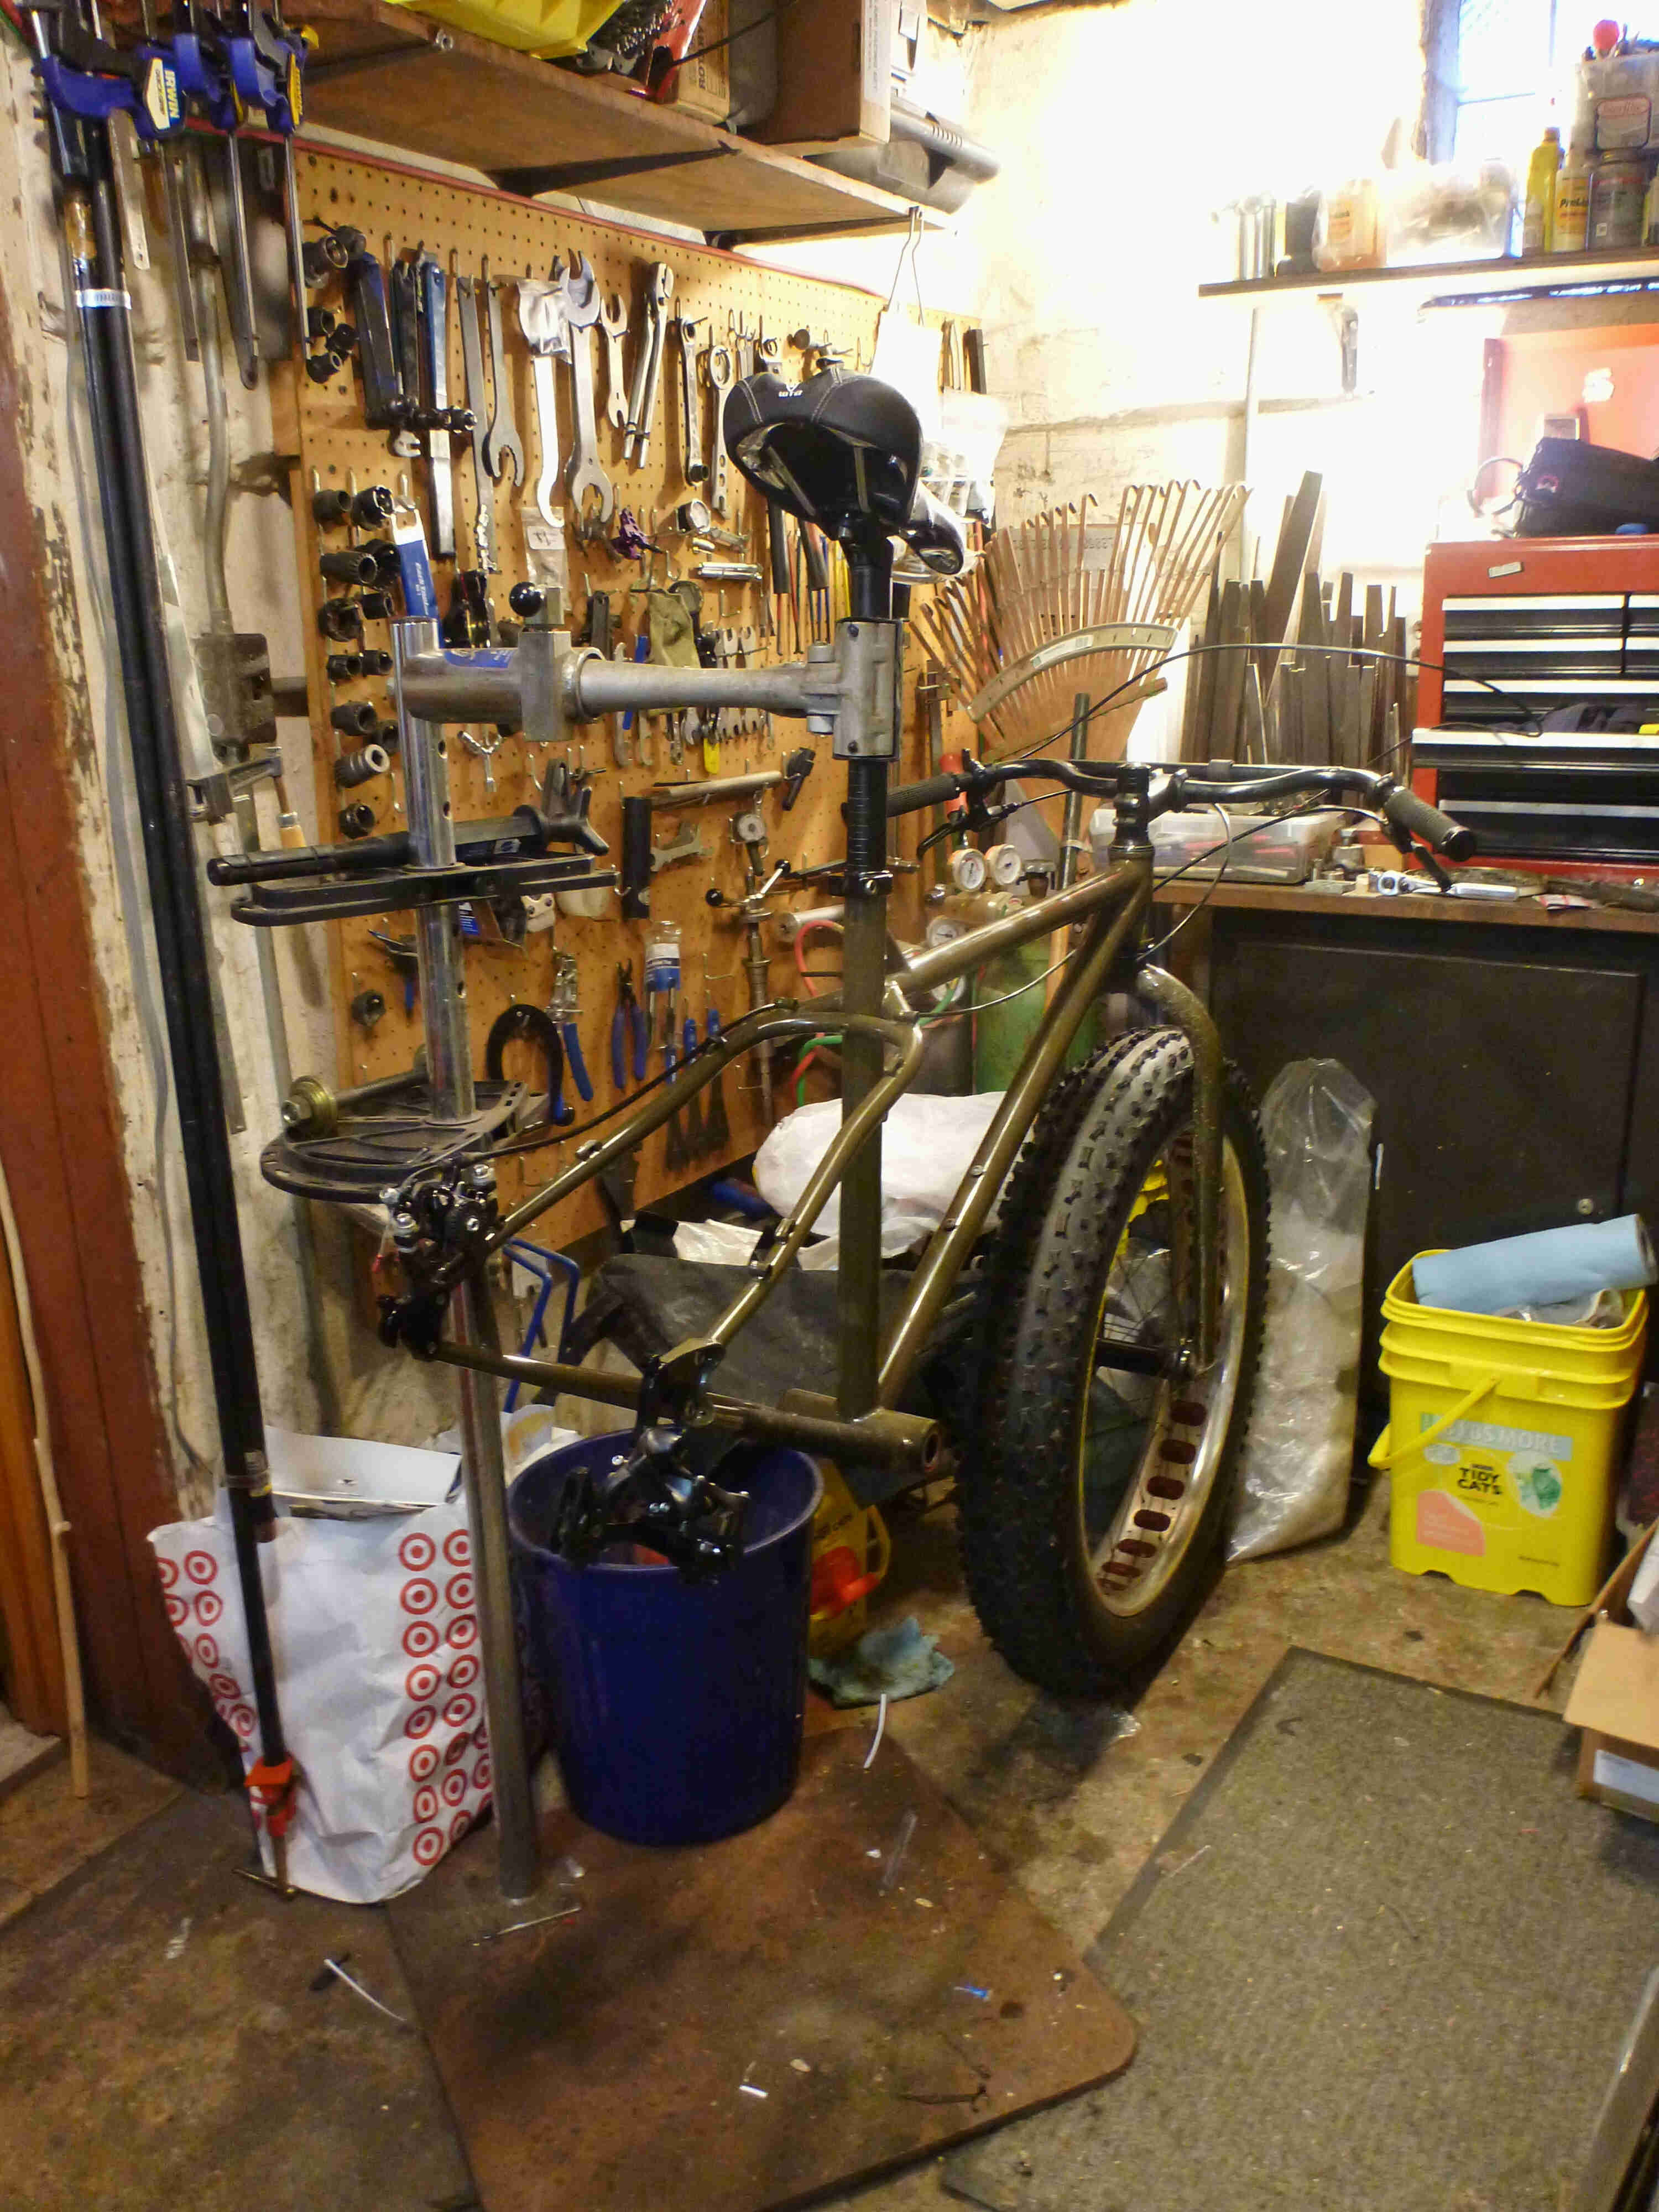 Rear view of a Surly Ice Cream Trucker fat bike, minus the drive train or rear wheel, on a stand in a workshop